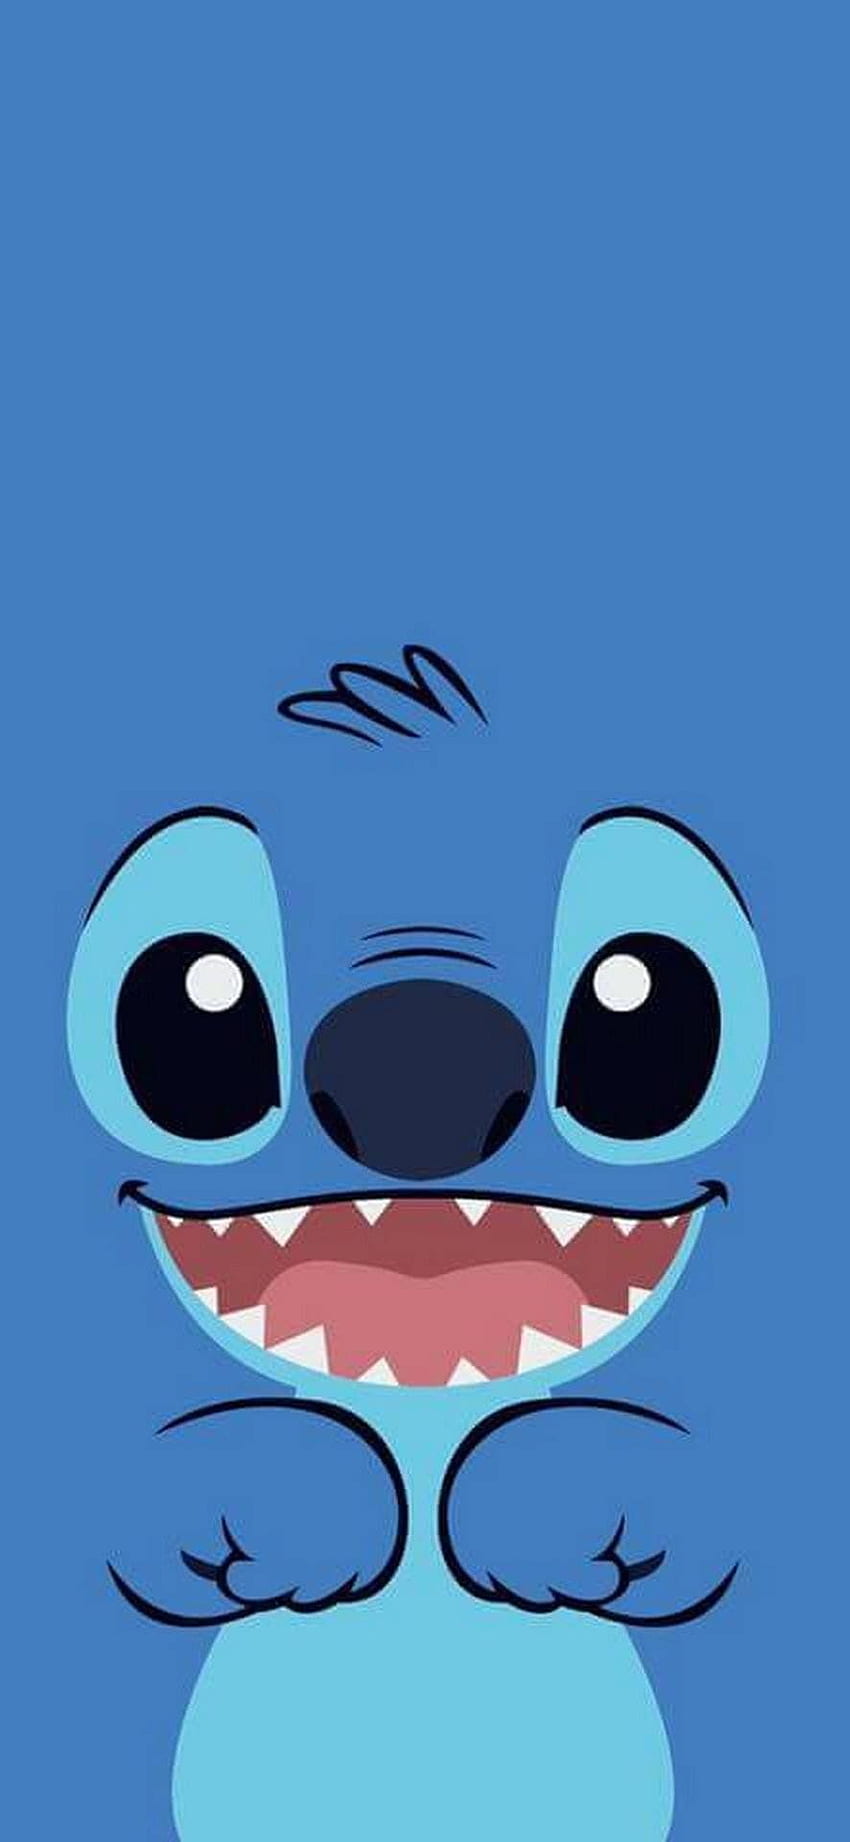 20 Dont Touch My iPad Stitch Wallpapers  WallpaperSafari